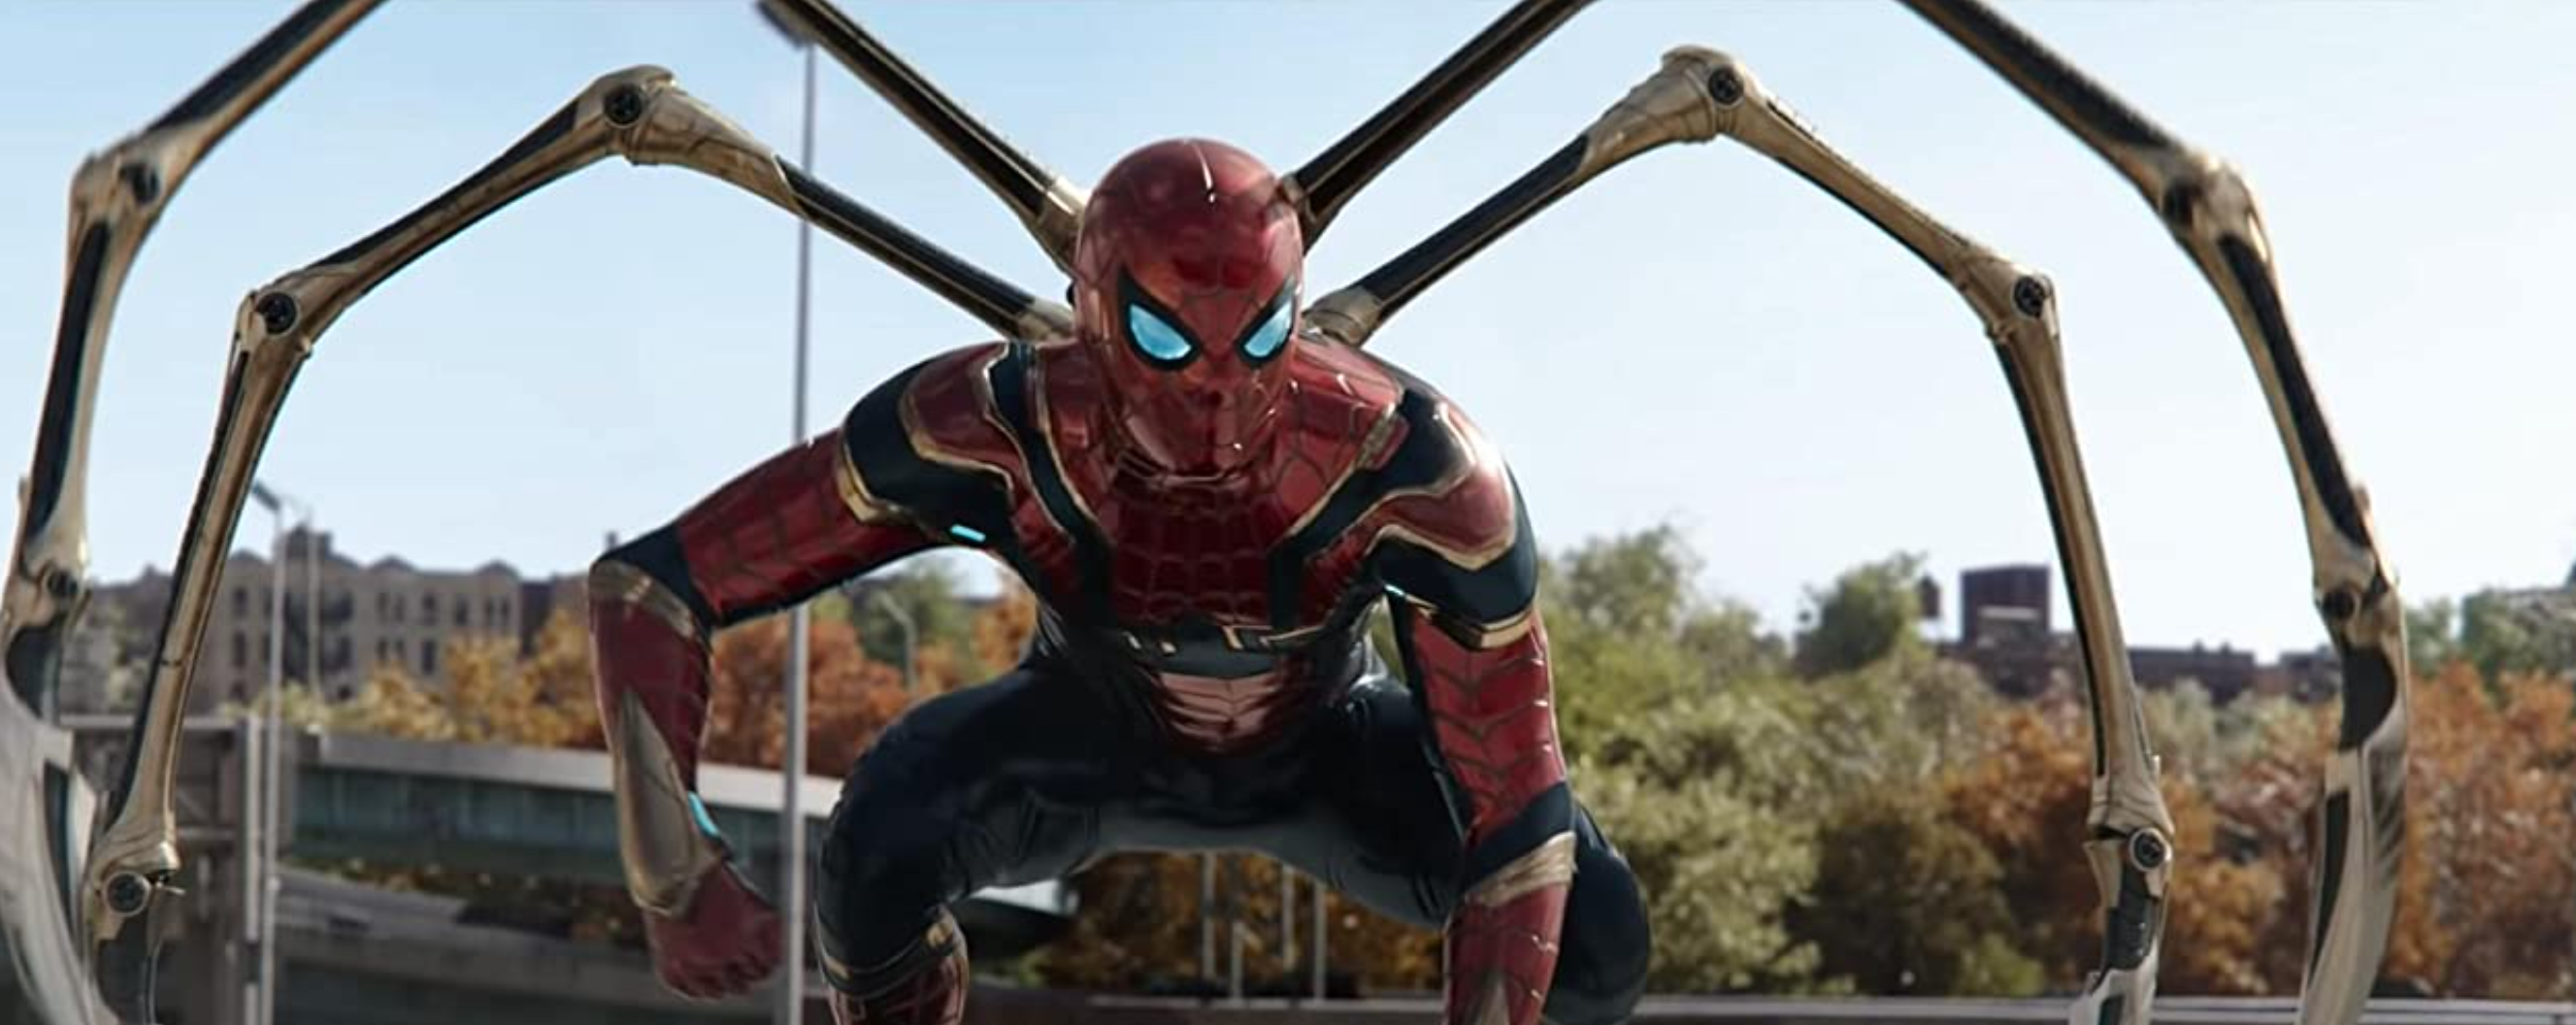 The Amazing Spider-Man 2' review: a step in the wrong direction